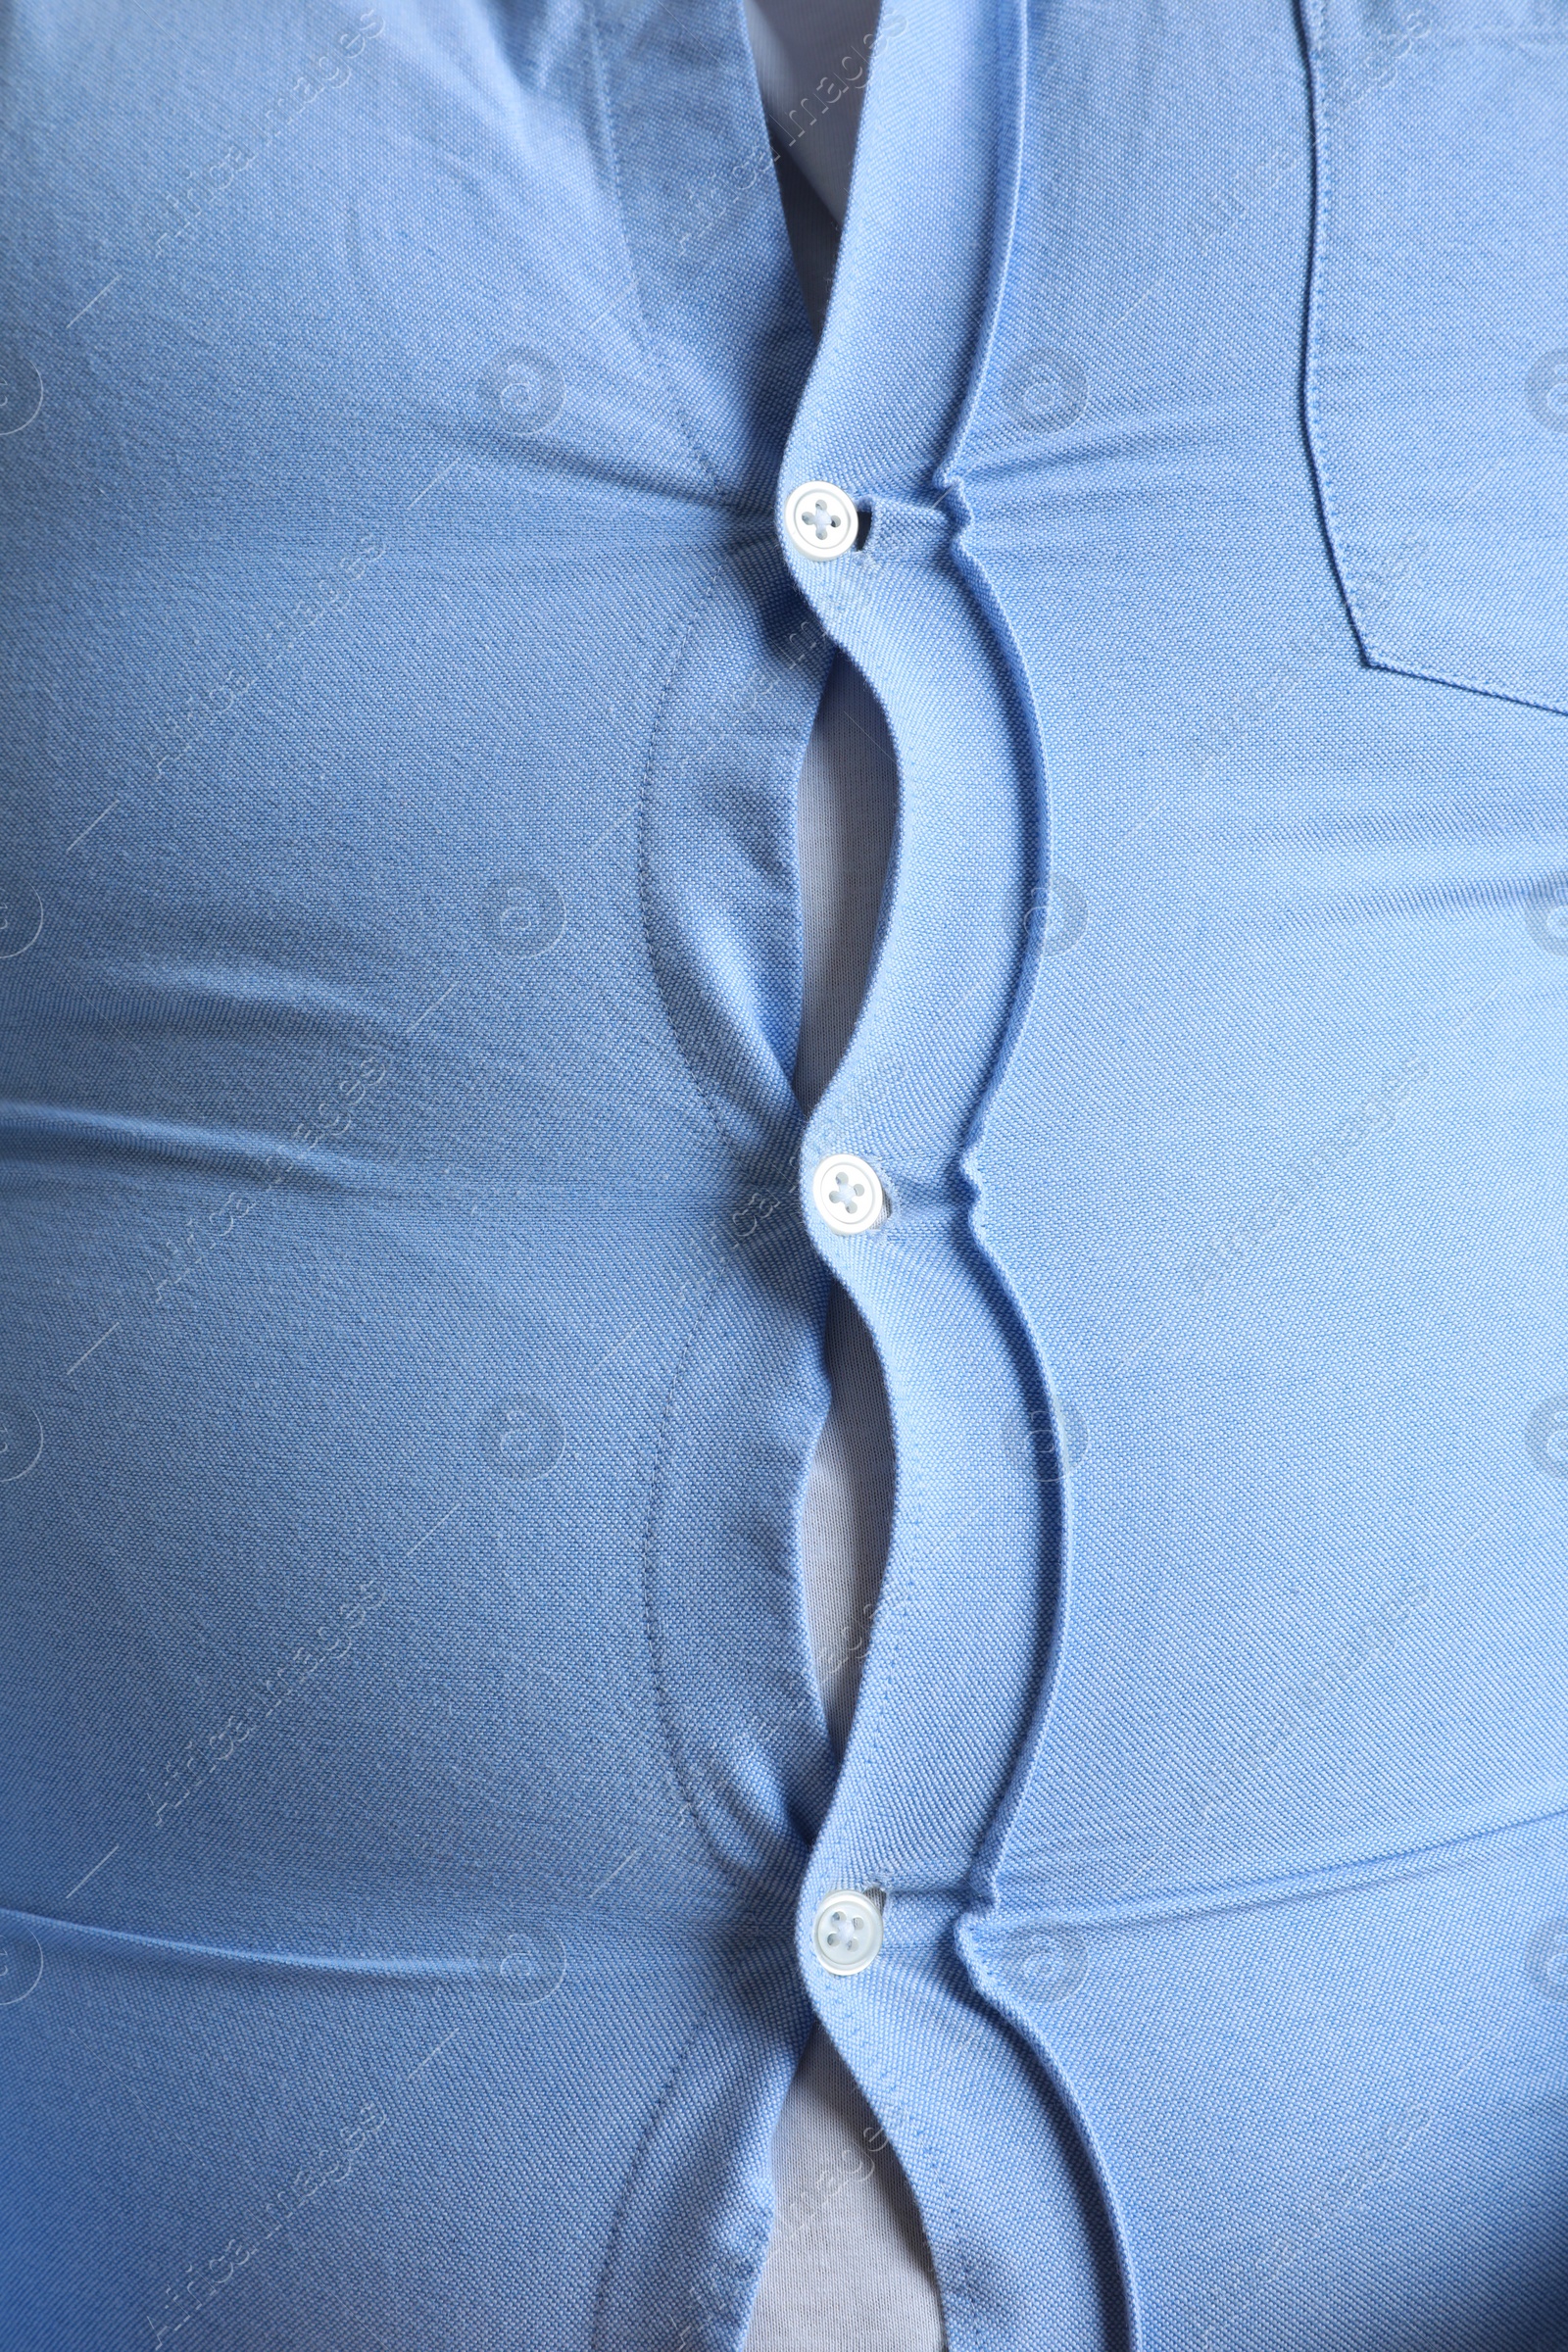 Photo of Closeup view of overweight man in tight shirt as background